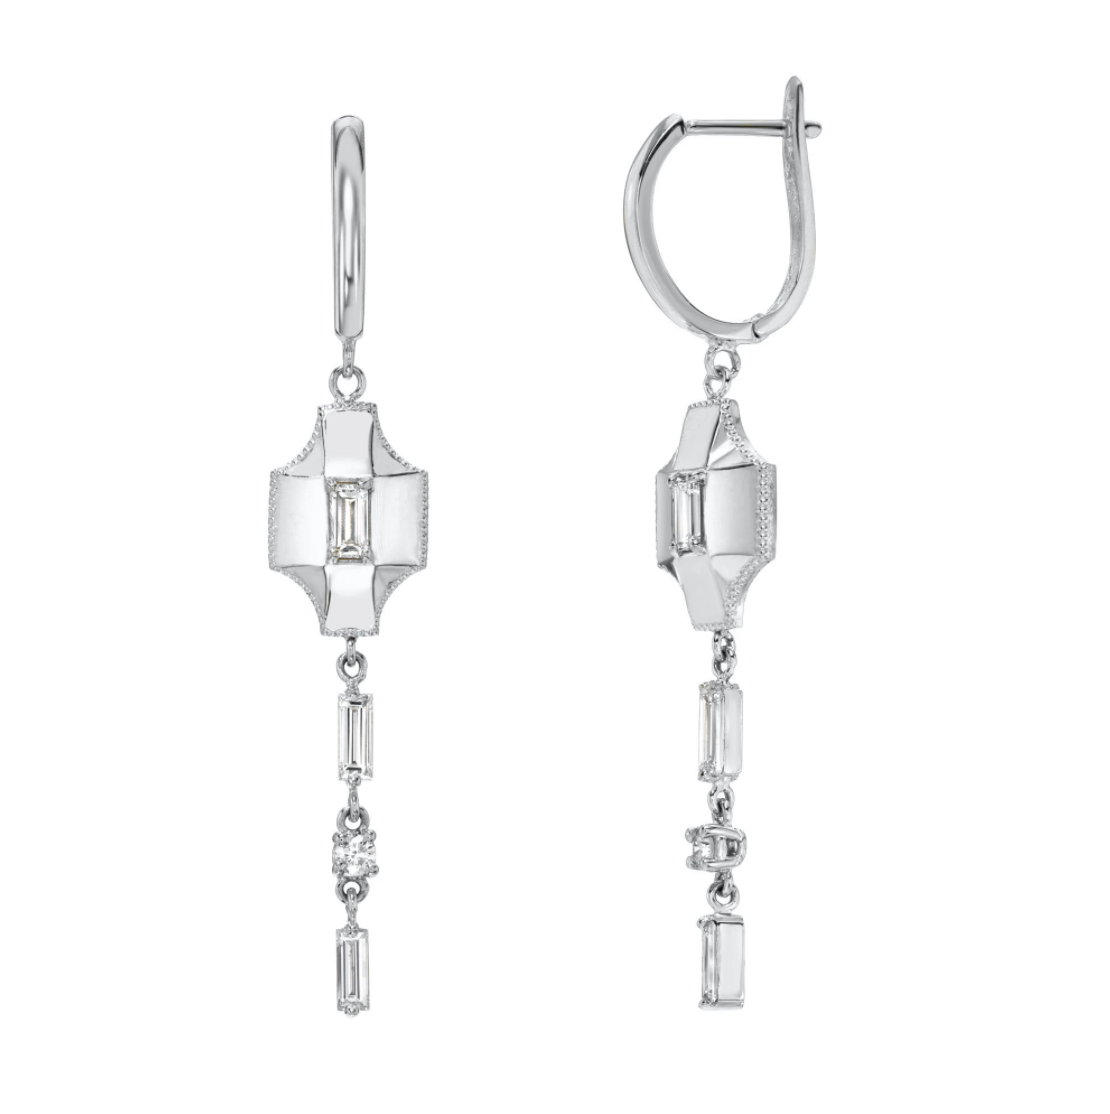 Baguette Contour Drop Earrings by Meredith Young